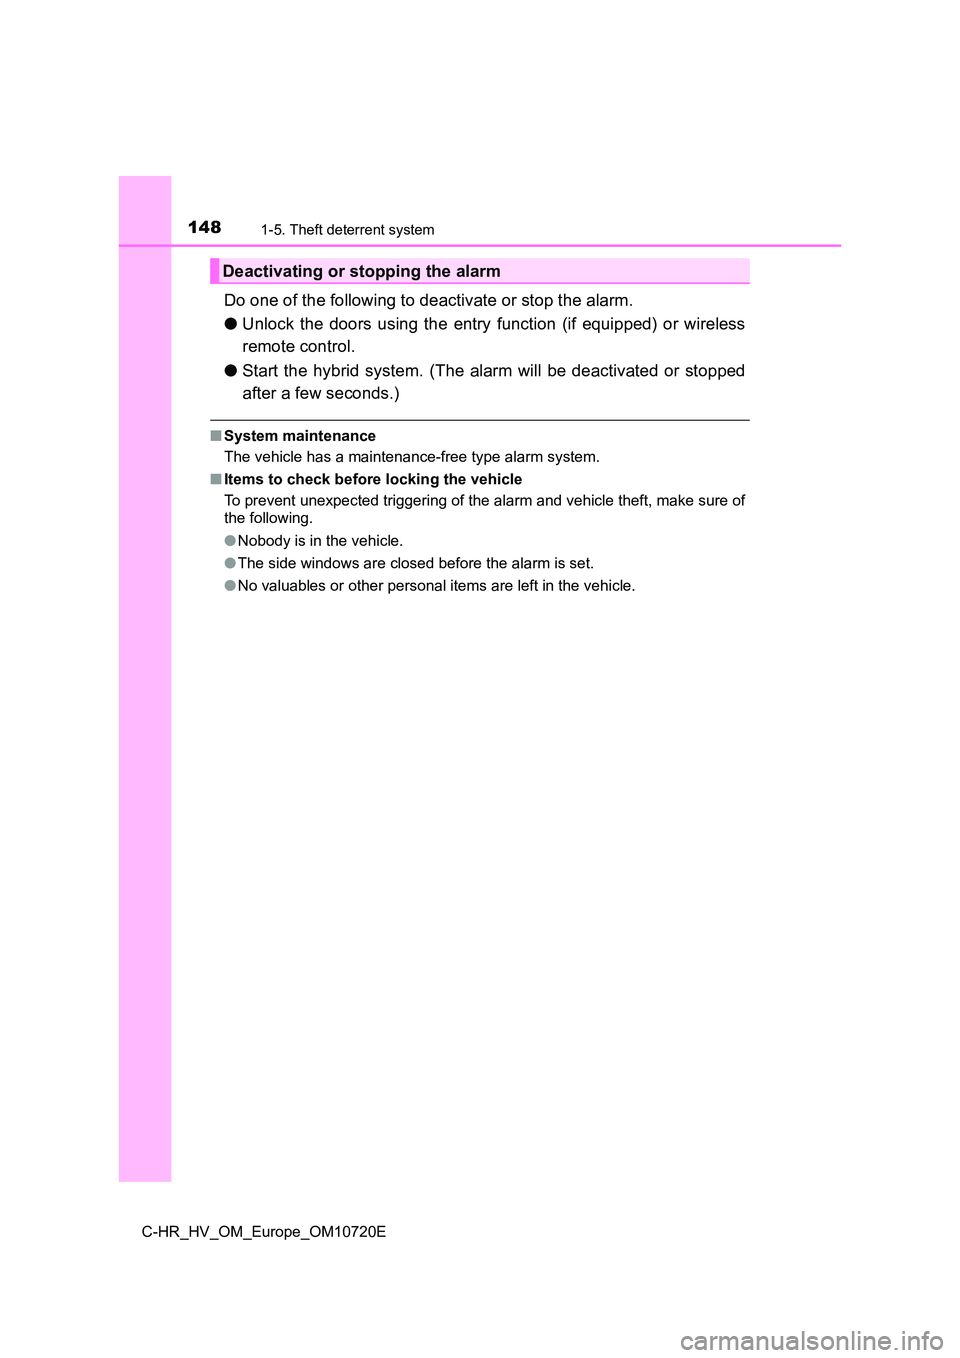 TOYOTA C-HR 2022  Owners Manual 1481-5. Theft deterrent system
C-HR_HV_OM_Europe_OM10720E
Do one of the following to deactivate or stop the alarm. 
● Unlock  the  doors  using  the  entry  function  (if  equipped)  or  wireless 
r